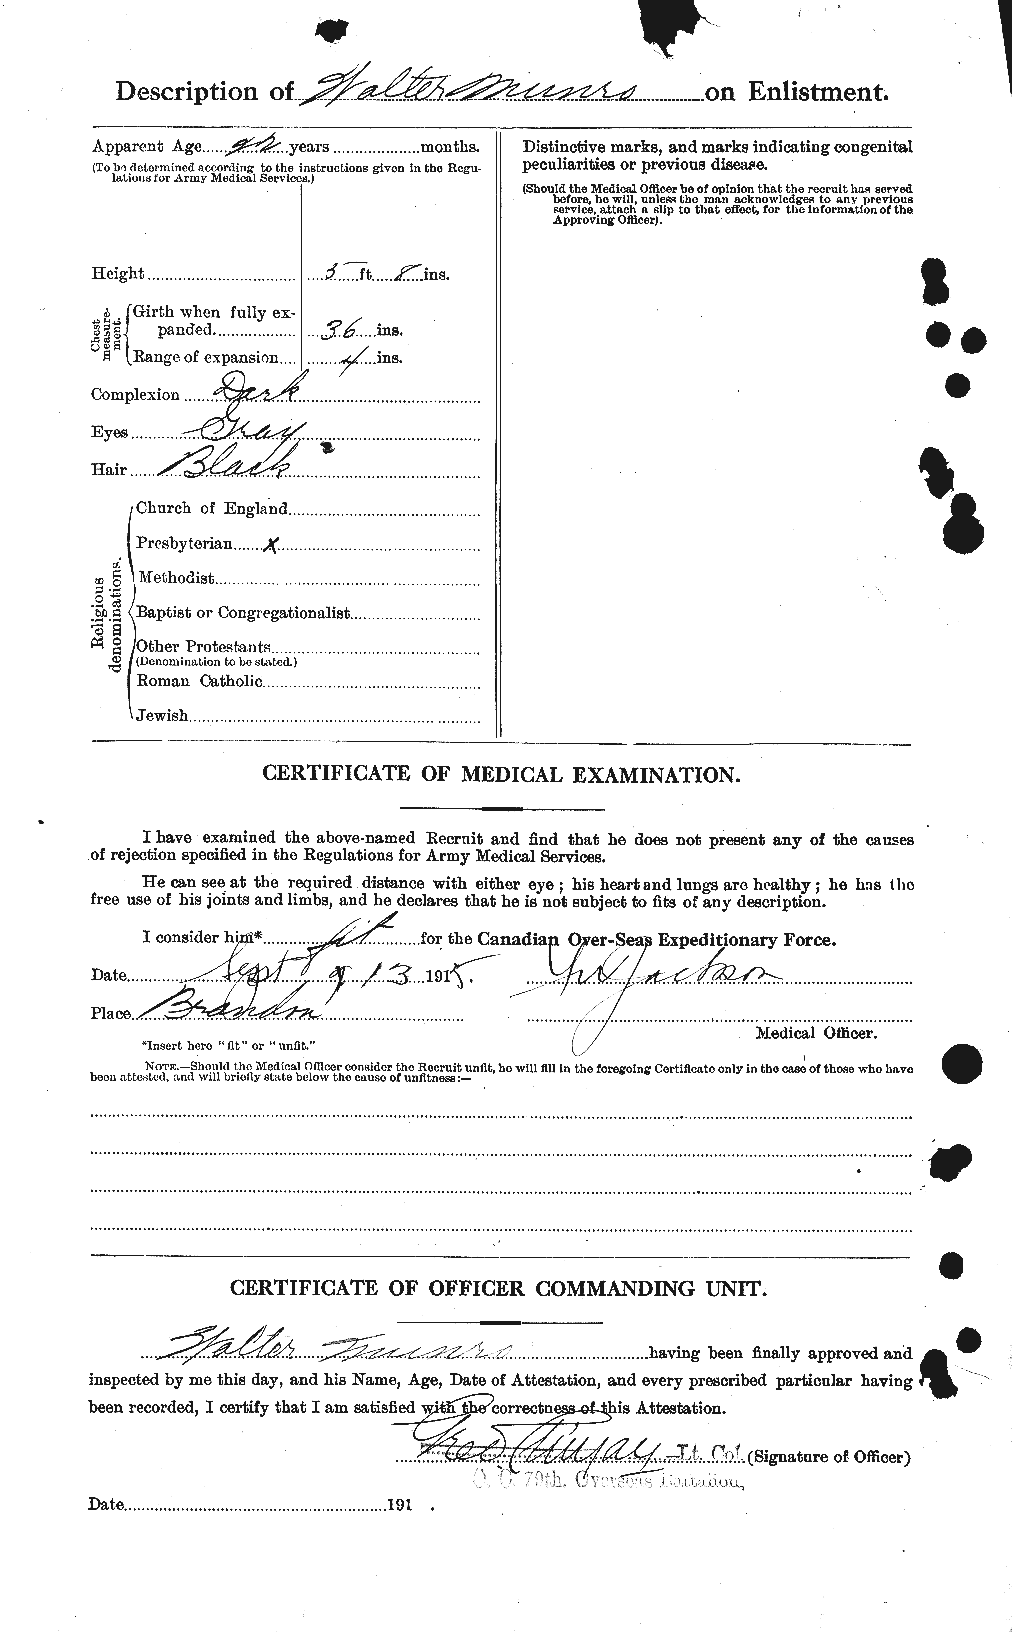 Personnel Records of the First World War - CEF 515290b